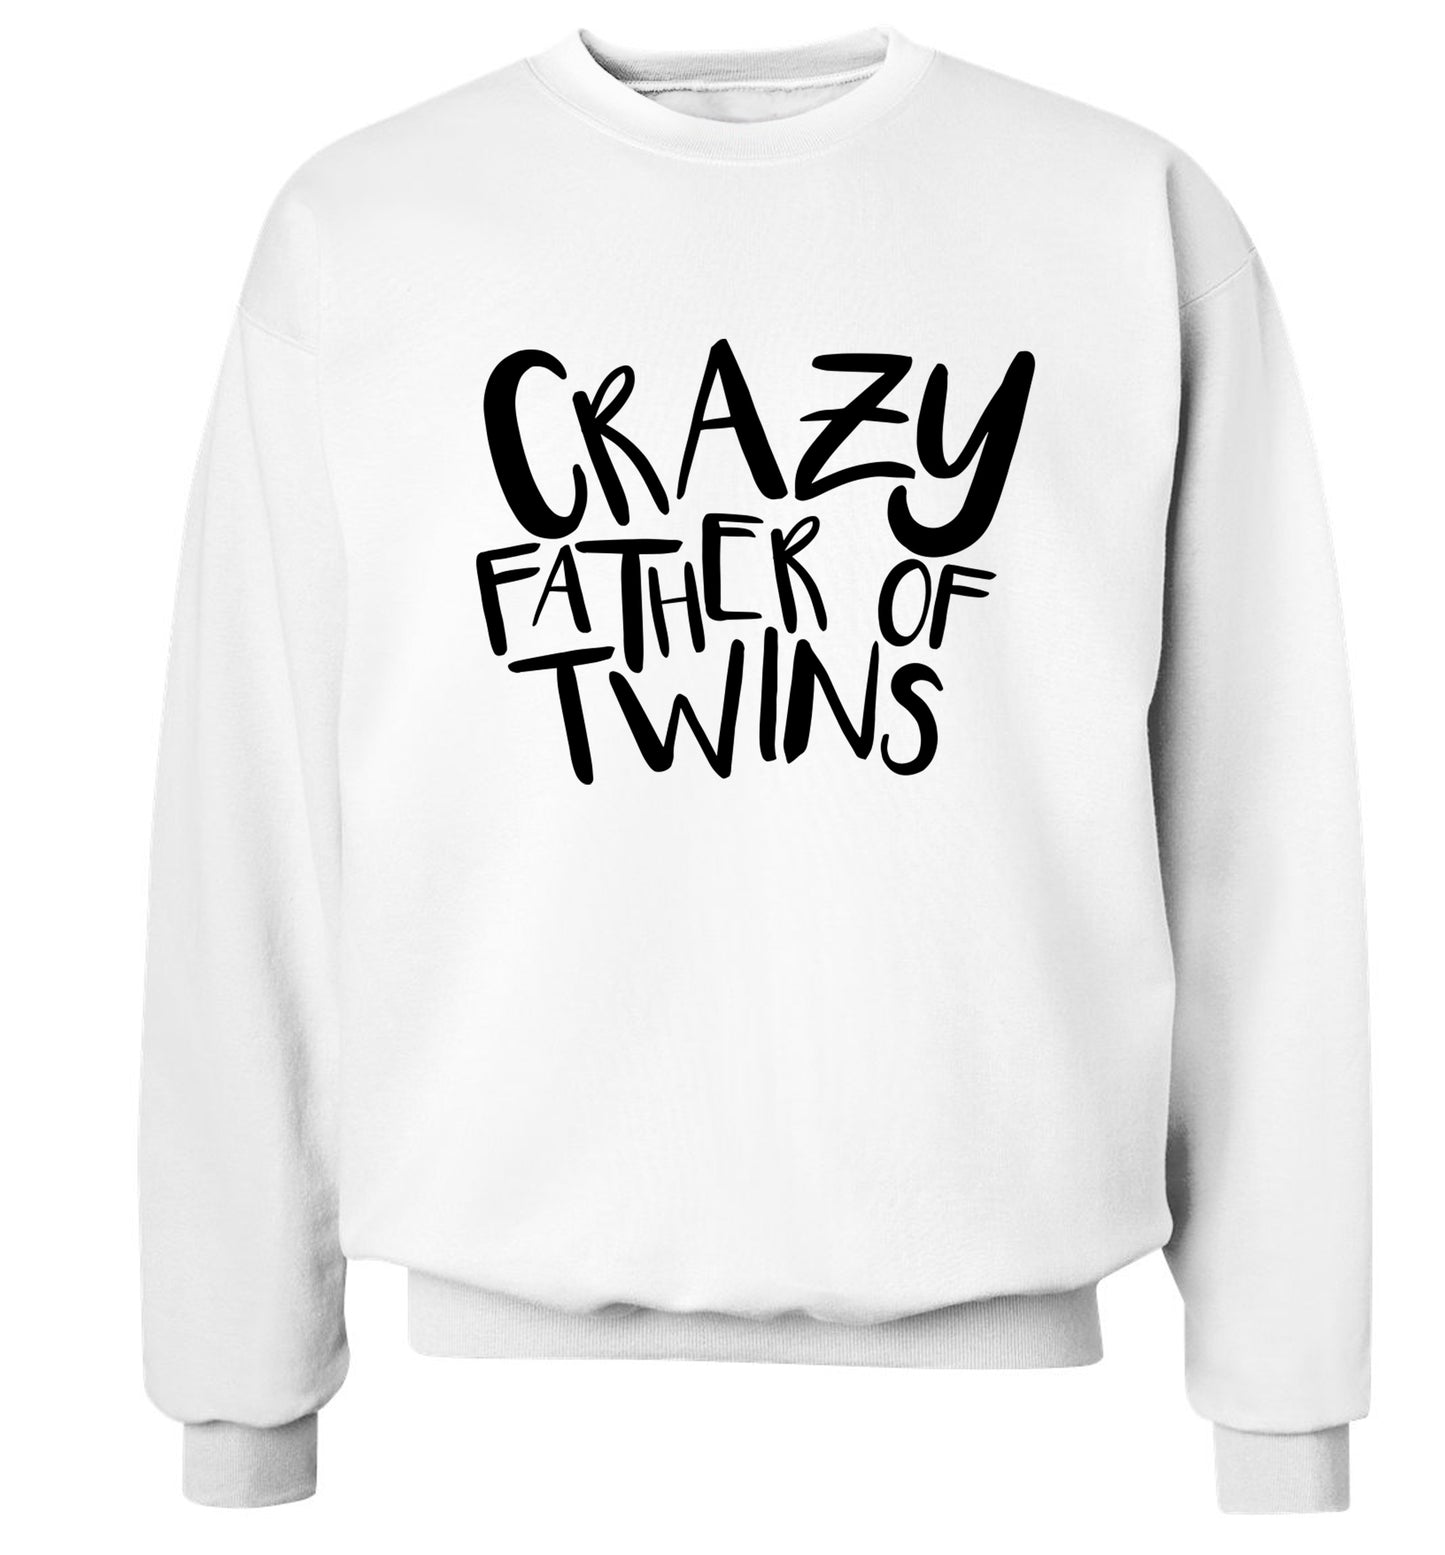 Crazy father of twins Adult's unisex white Sweater 2XL